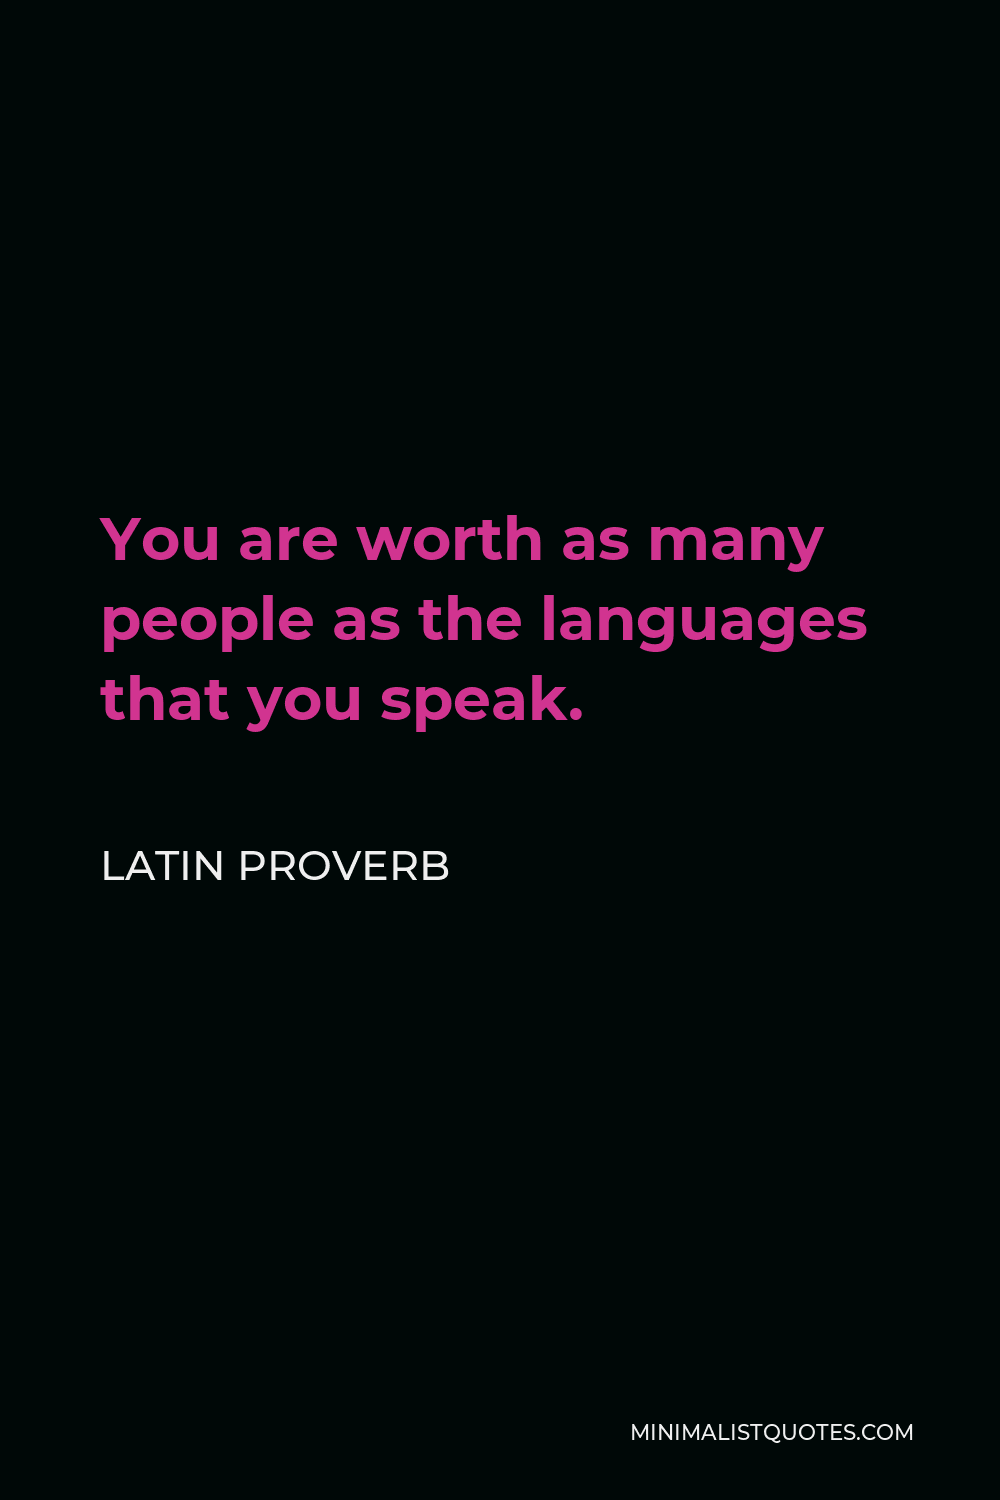 Latin Proverb Quote - You are worth as many people as the languages that you speak.